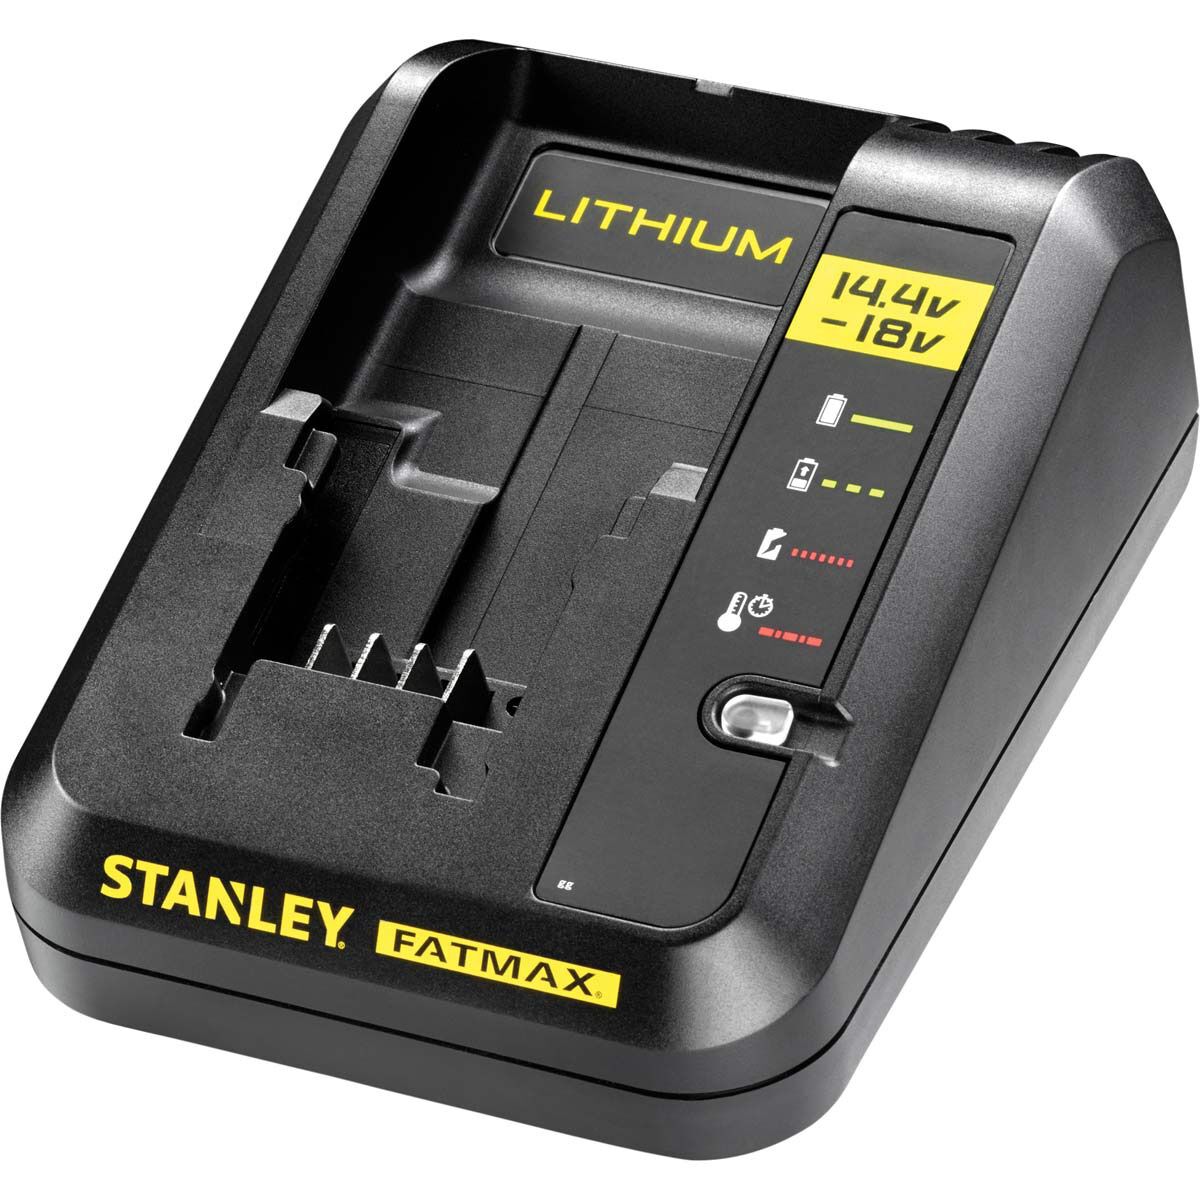 Stanley FatMax Battery Charger - 14.4 to 18V 5035048478790 | eBay